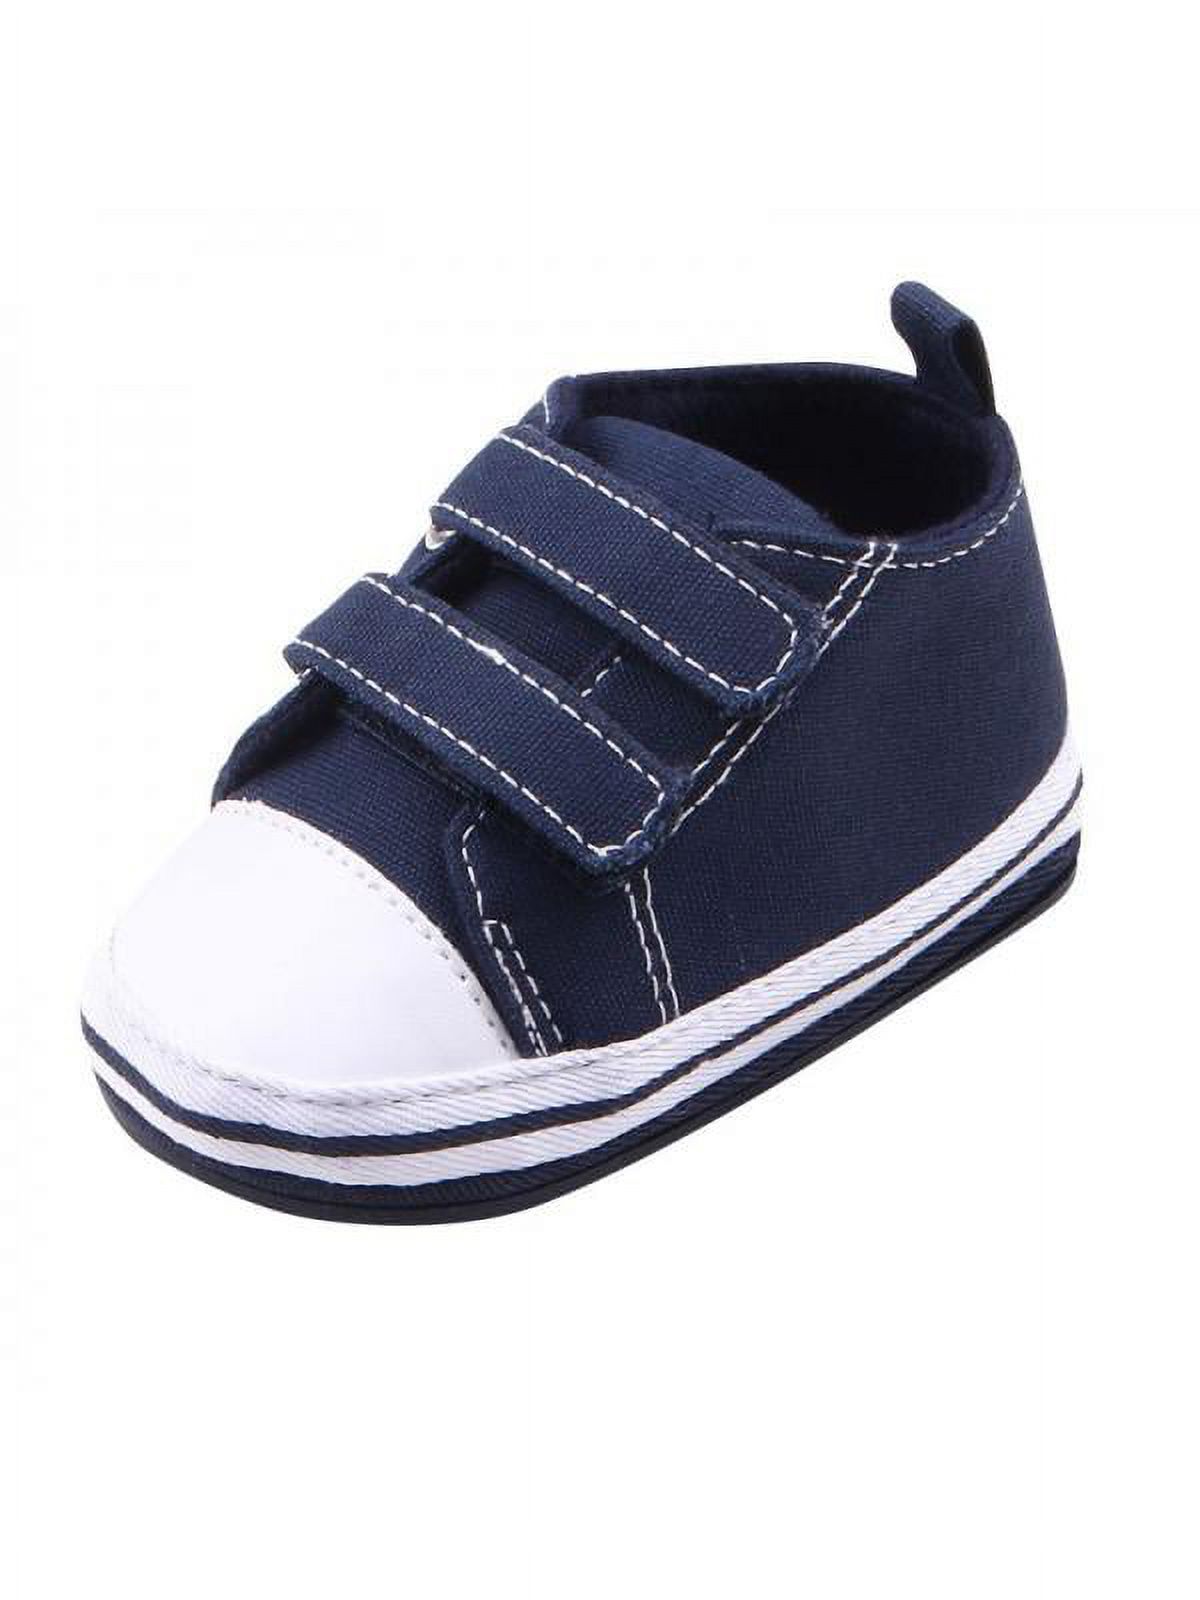 Infant Toddler Baby Boys Girls Soft Sole Crib Shoes Sneaker Newborn 0-27 Months - image 1 of 9